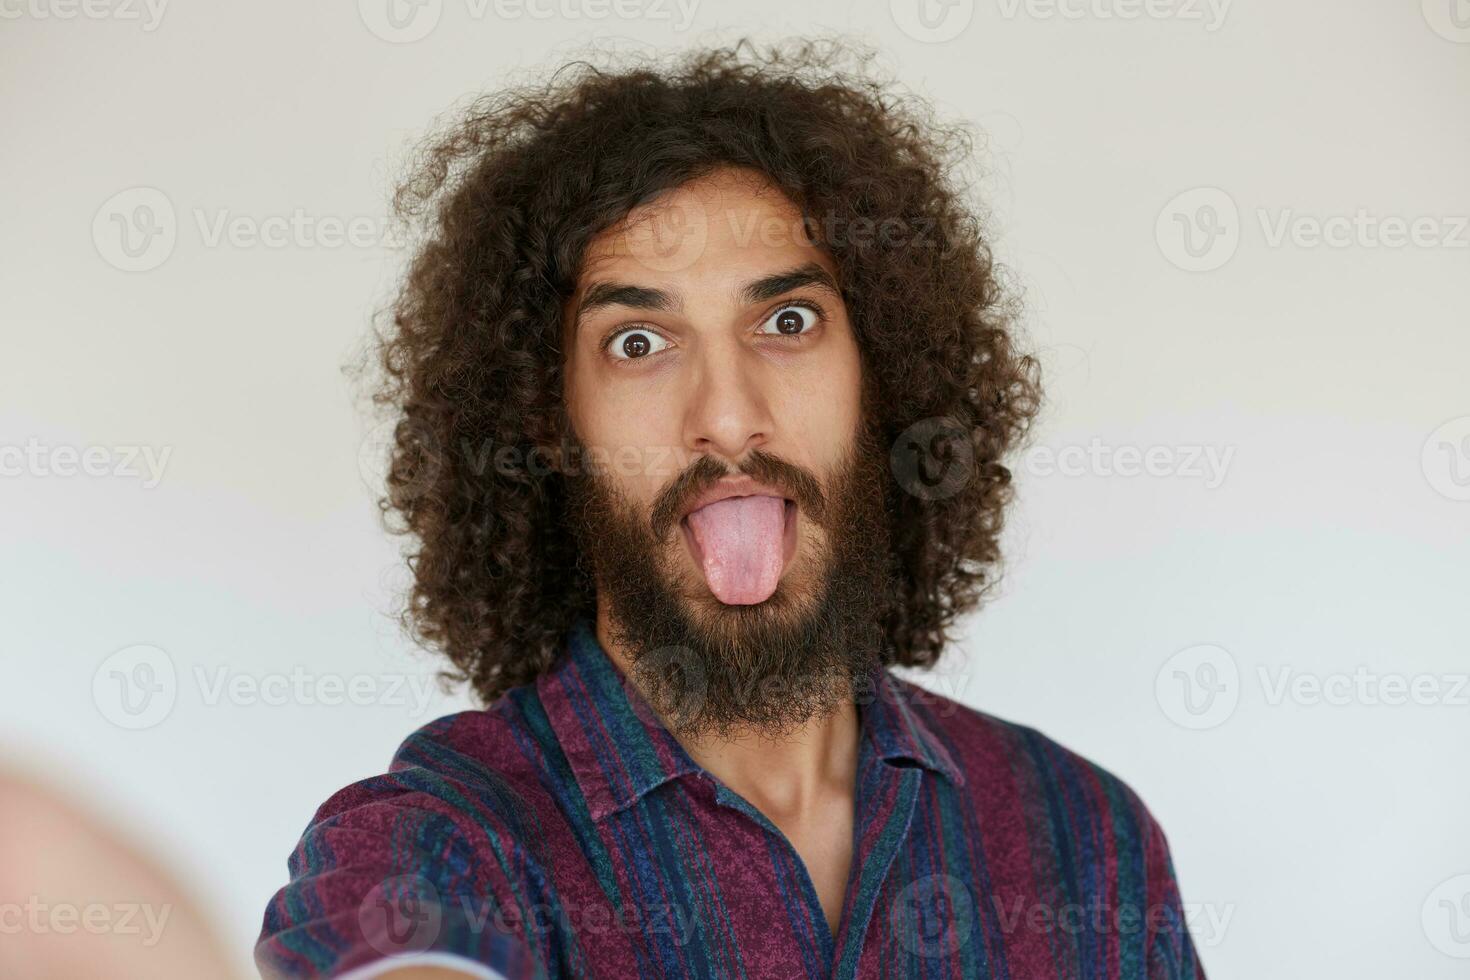 Funny indoor shot of attractive young dark haired curly bearded man fooling and making faces while standing against white background, dressed in striped multi-colored shirt photo